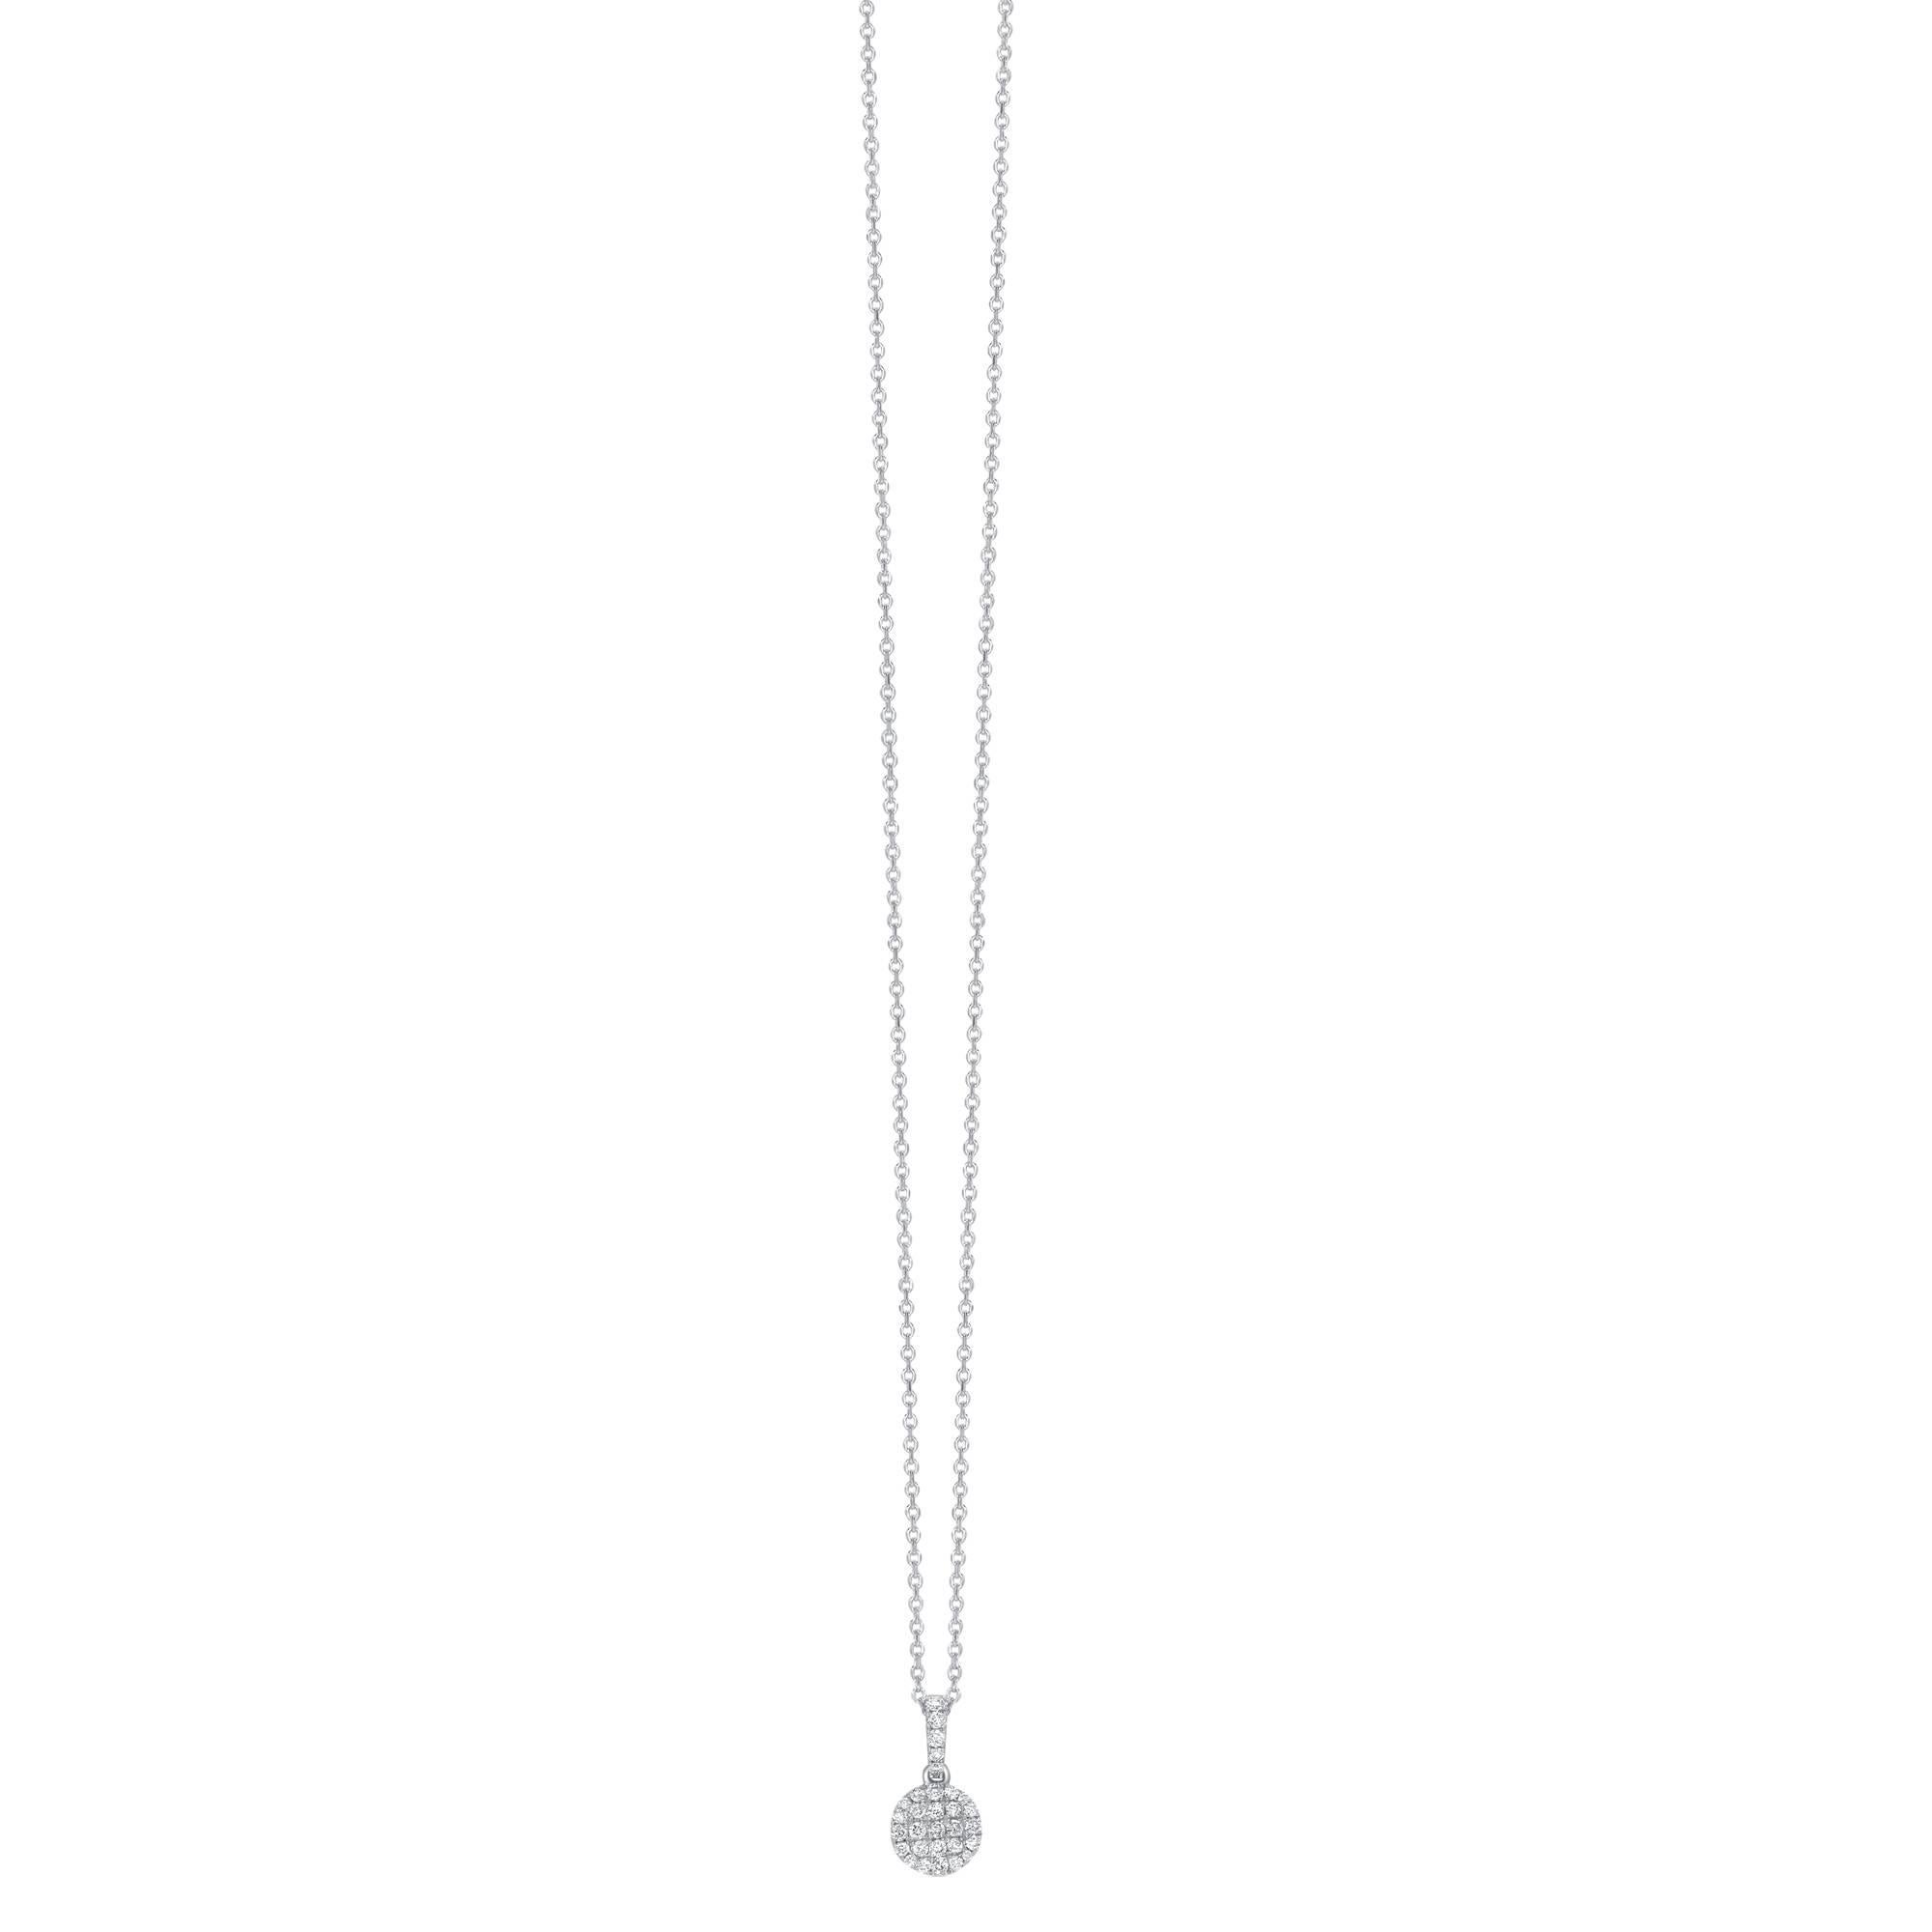 The height of sophistication. This delicate 6mm Round Brilliant Diamond button shaped pendant glistens with the diamonds highlighted by the 18 Karat White Gold setting. H-SI white diamonds in a round cluster with a pave set on the chain connector.